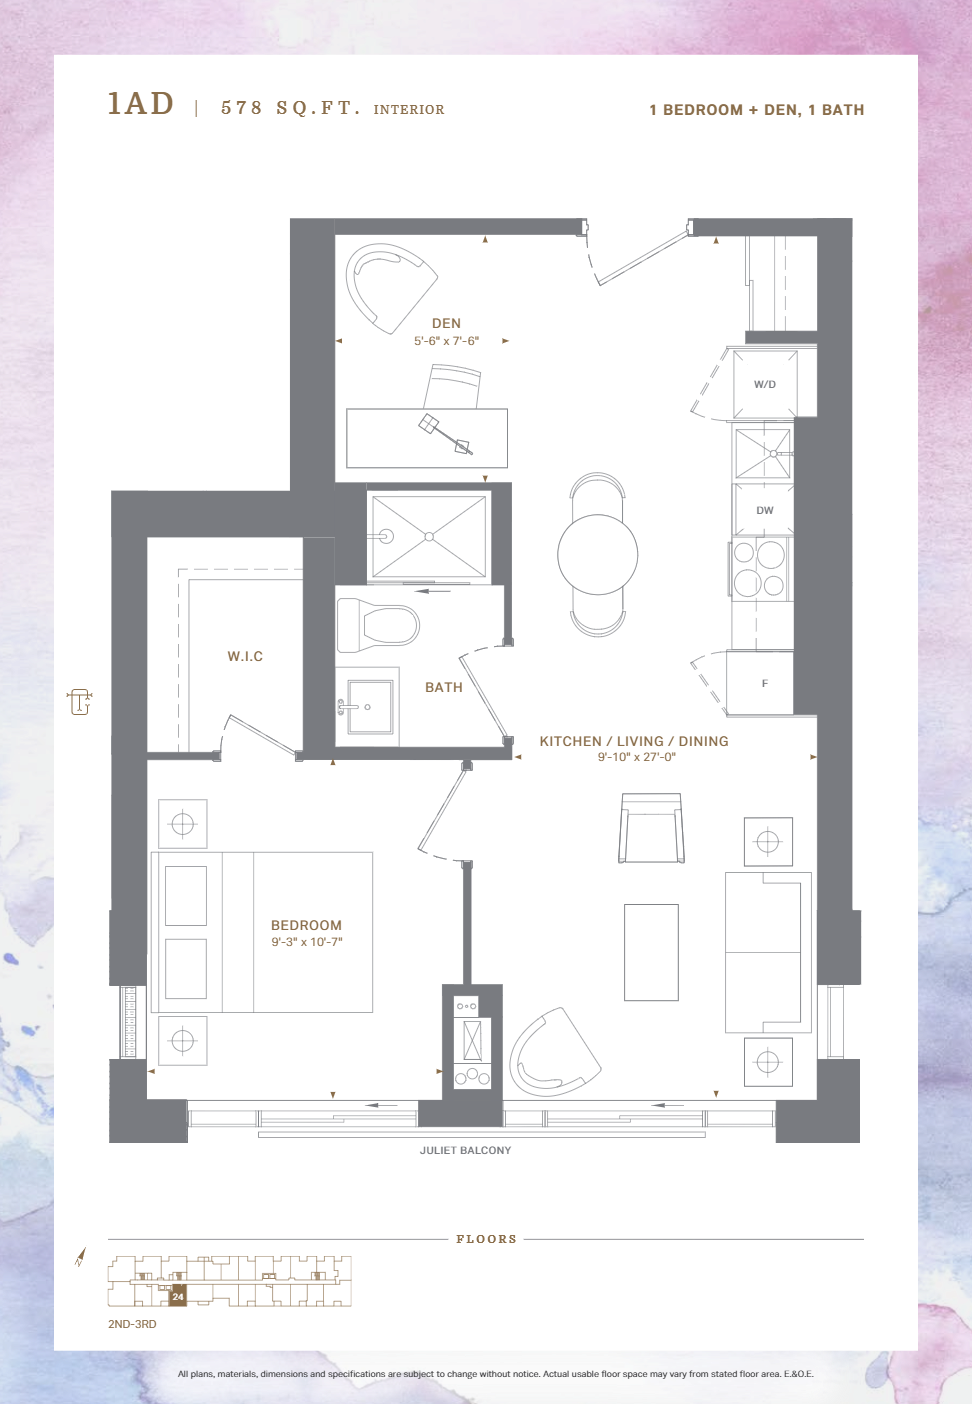  Floor Plan of The Charlotte Condos with undefined beds